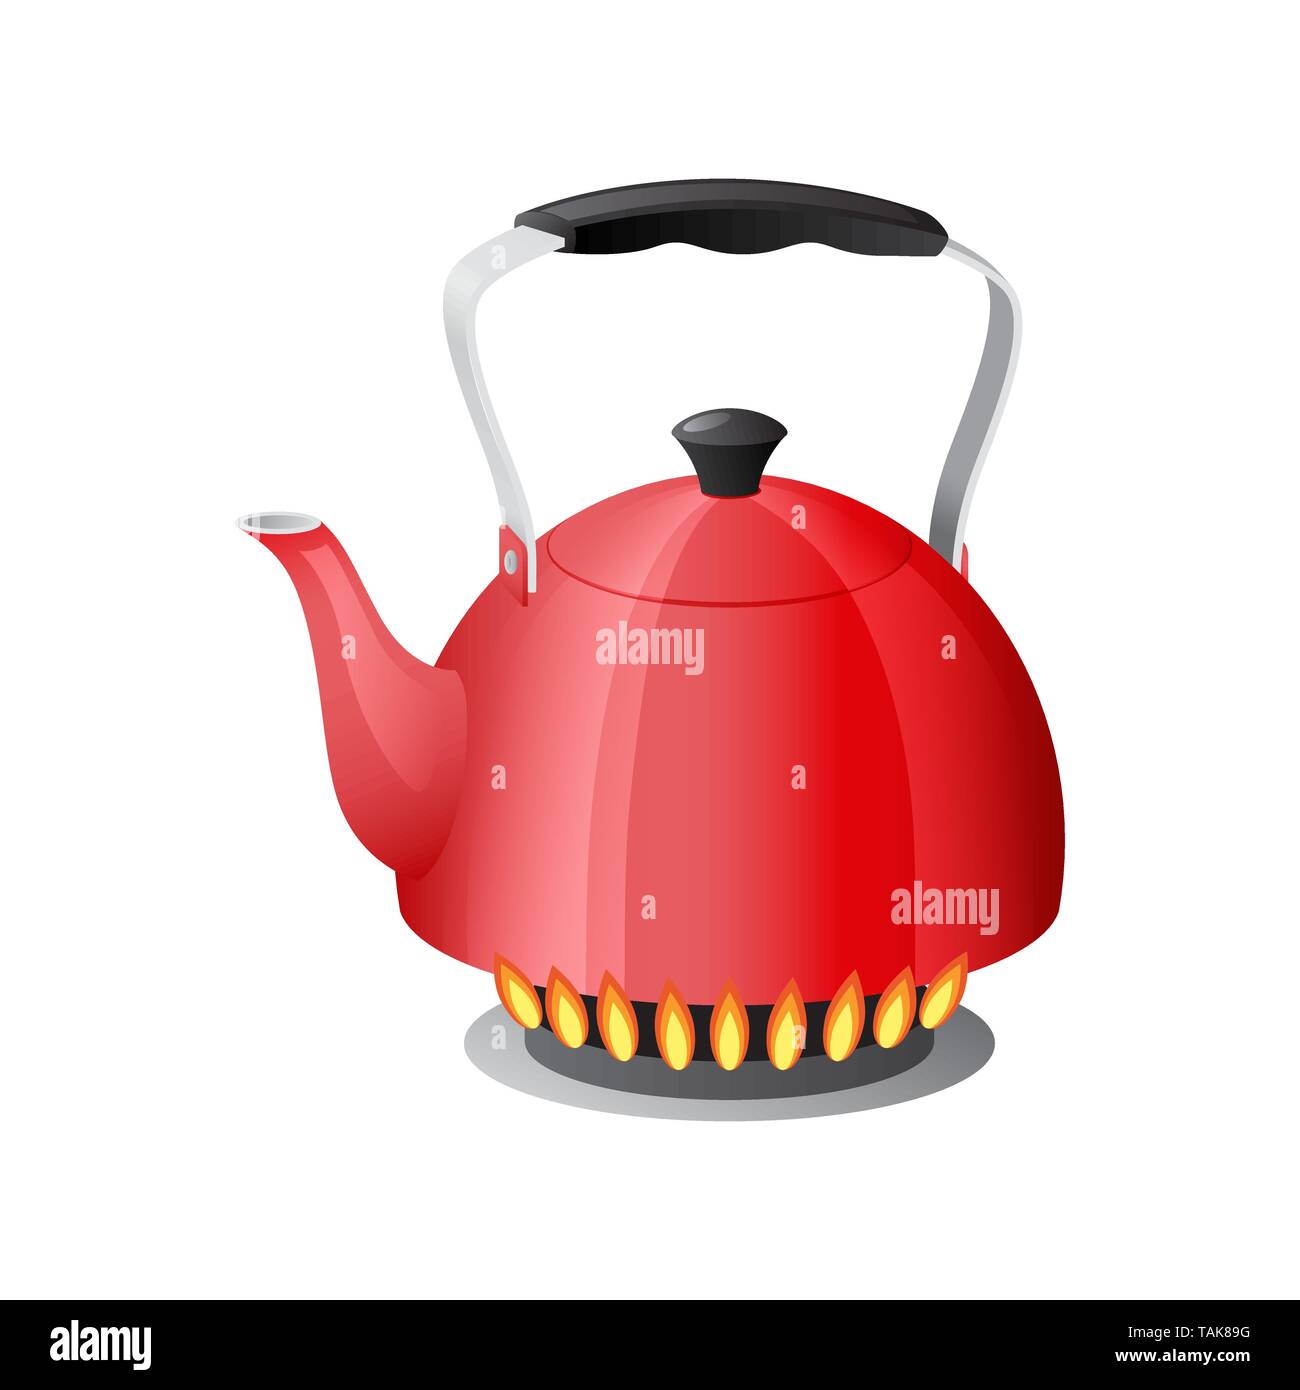 Red kettle with boiling water on kitchen stove flame Stock Vector